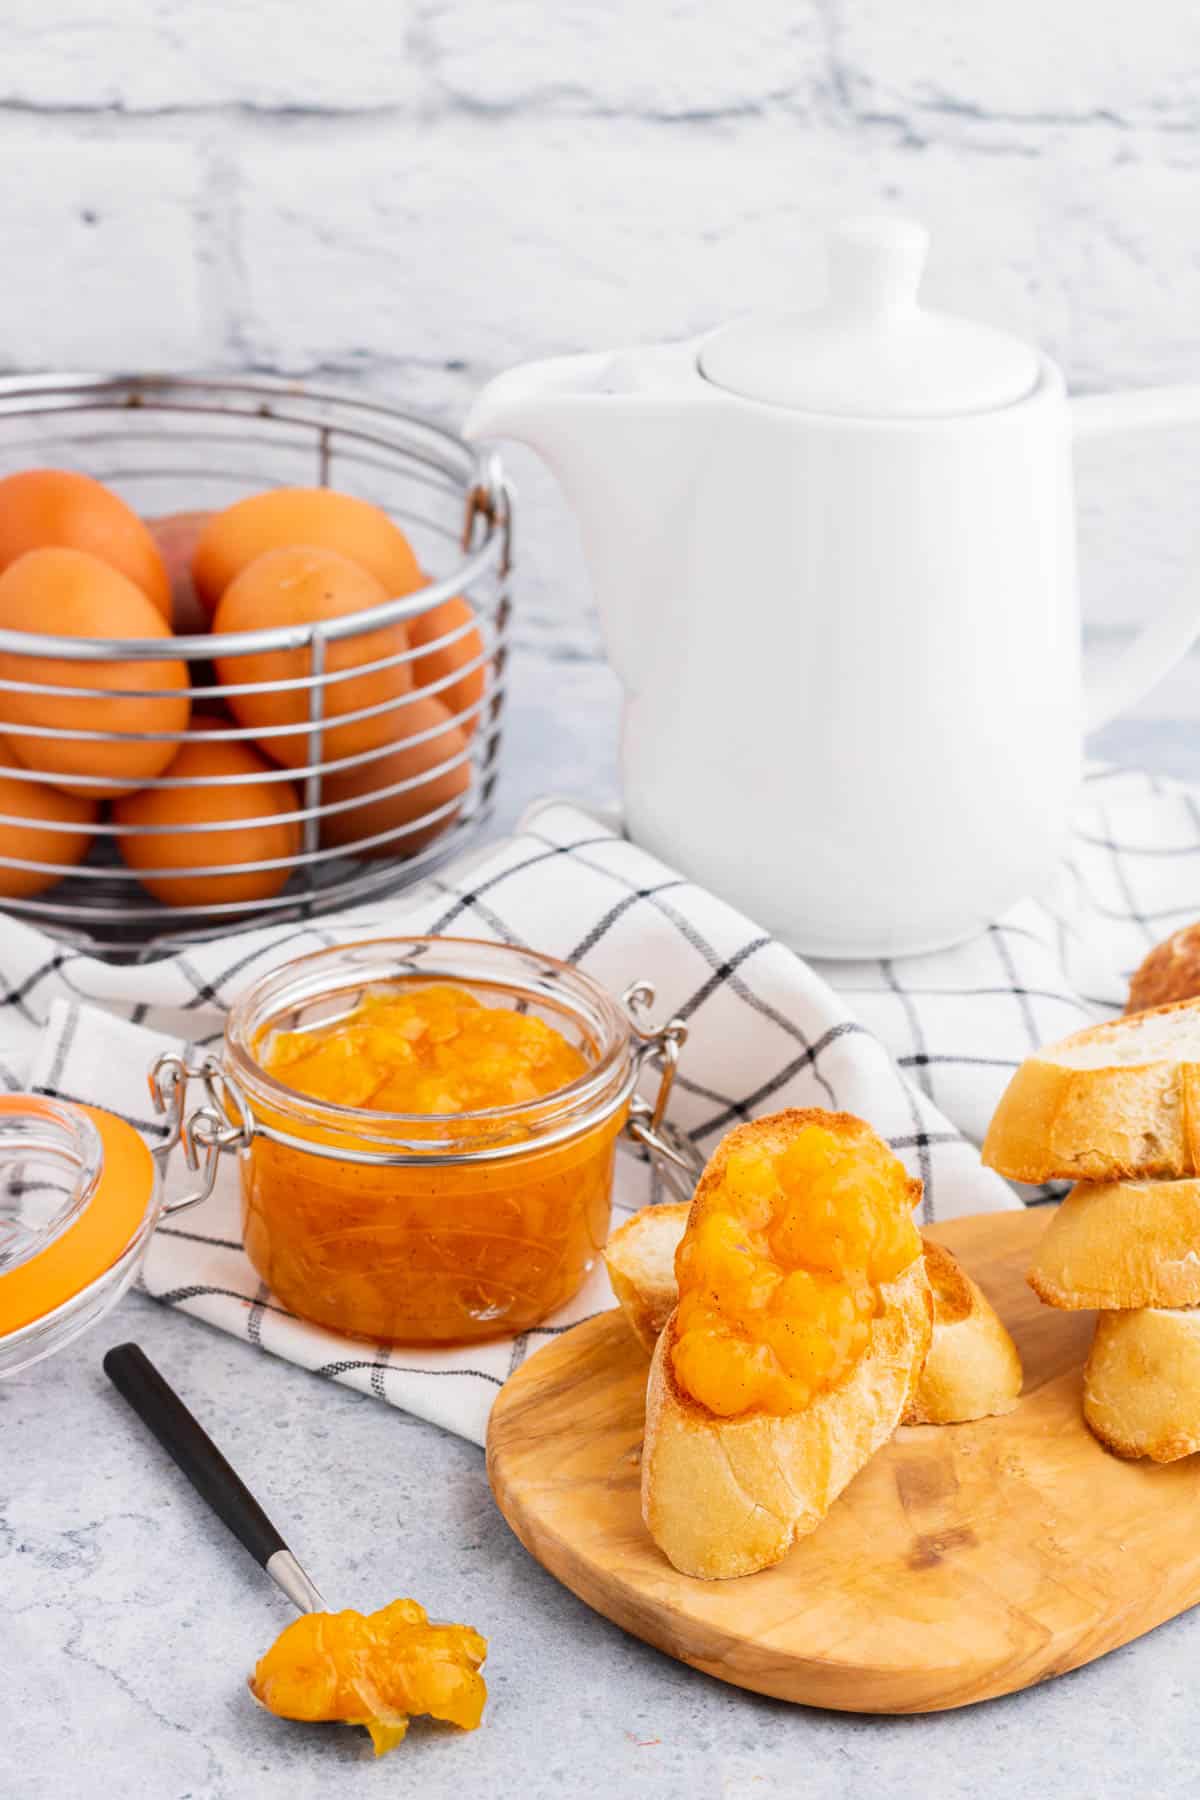 Breakfast scene with a coffee pot, eggs, and toast covered in bright orange Peach Freezer Jam in front of a jar of the same jam.